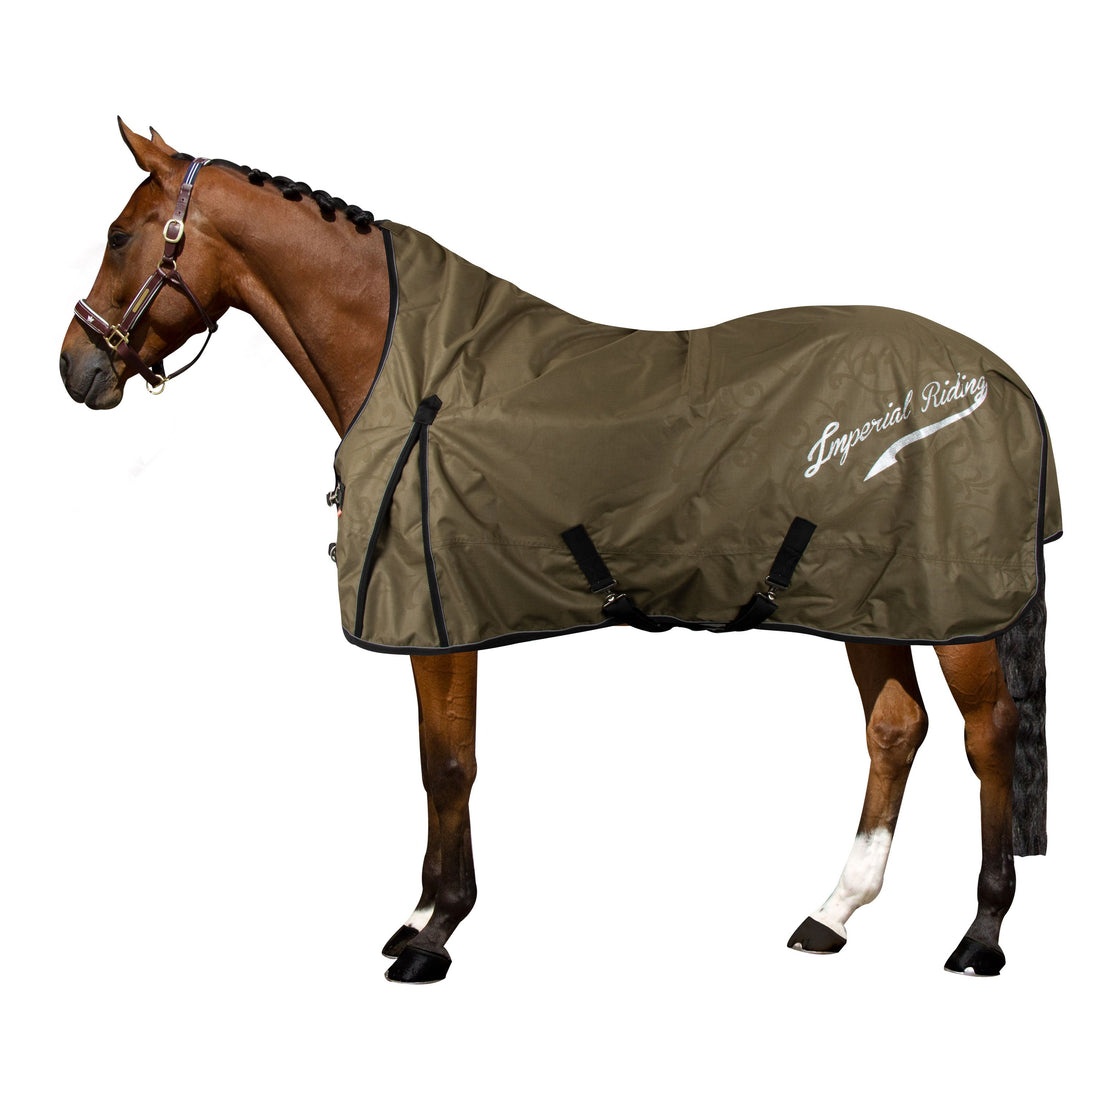 Imperial Riding - Outdoor blanket, Super-dry, 400gr